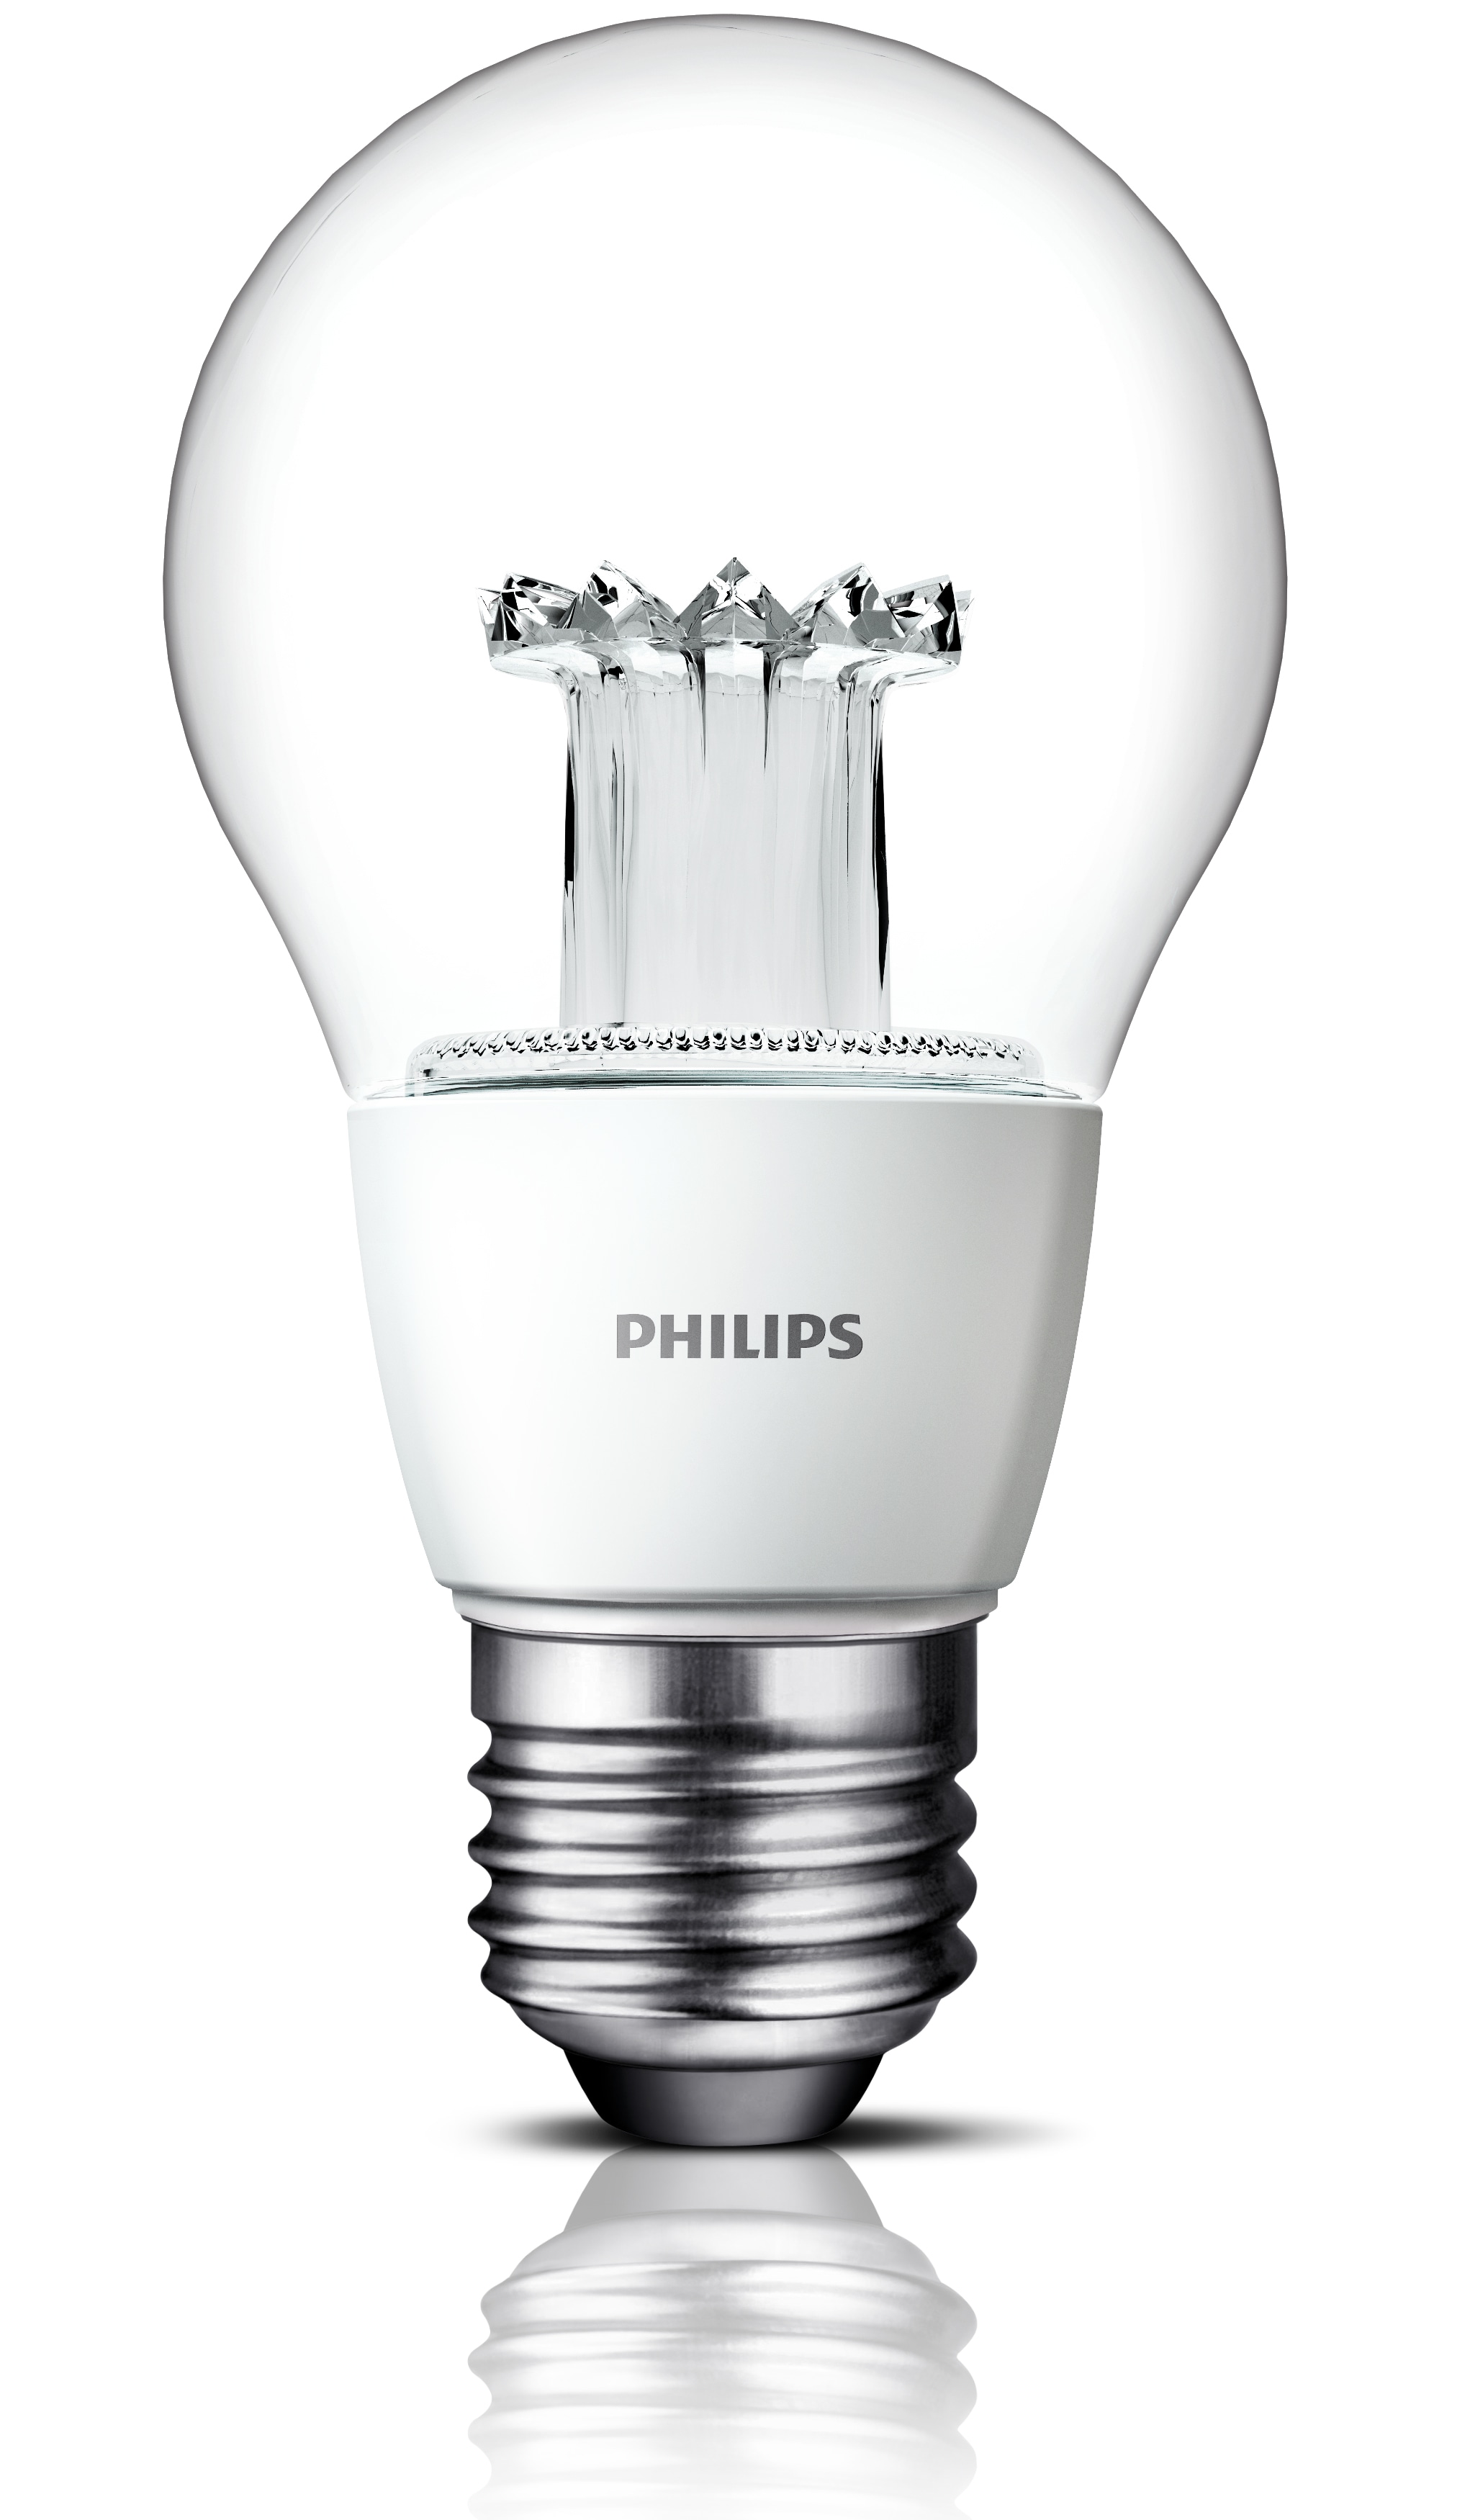 Philips brings the traditional light bulb into the 21st Century